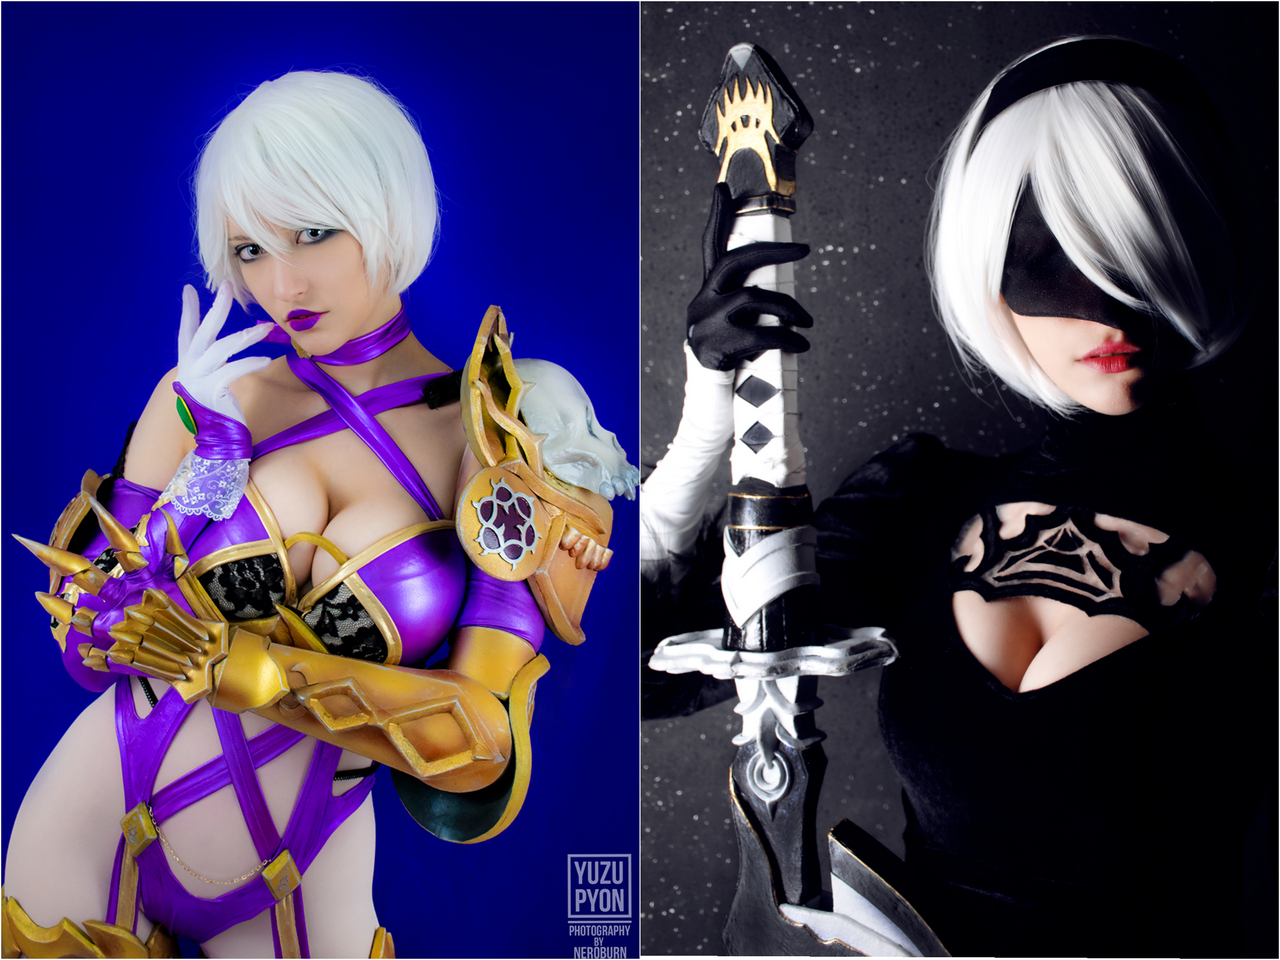 2b Got Announced In Soulcalibur 6 Funny Coincidence That I Crafted Both Cosplays In The Past Which One Do You Prefer Yuzupyon As Ivy Valentine And 2